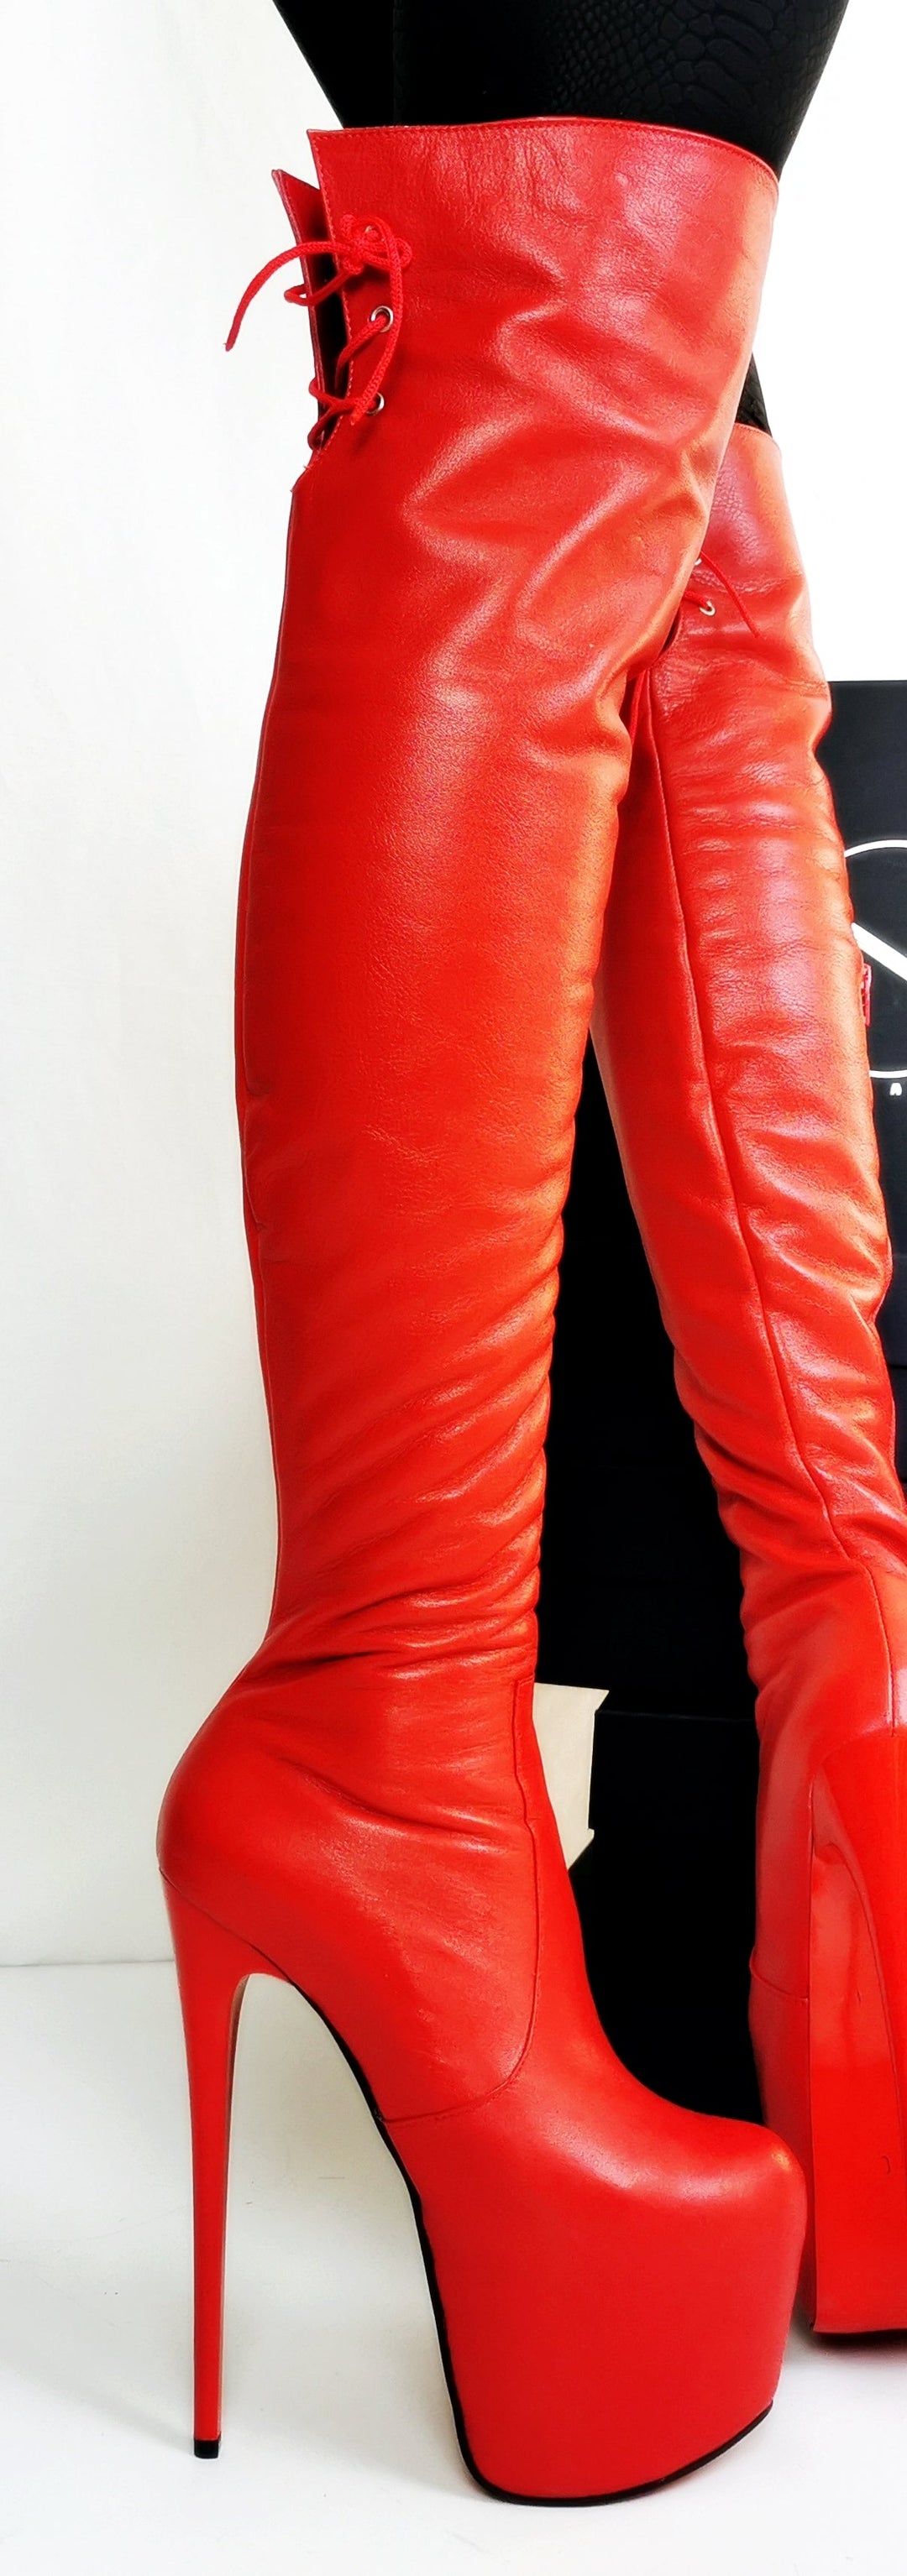 Back Lace Red Genuine Leather Thigh High Boots - Tajna Club